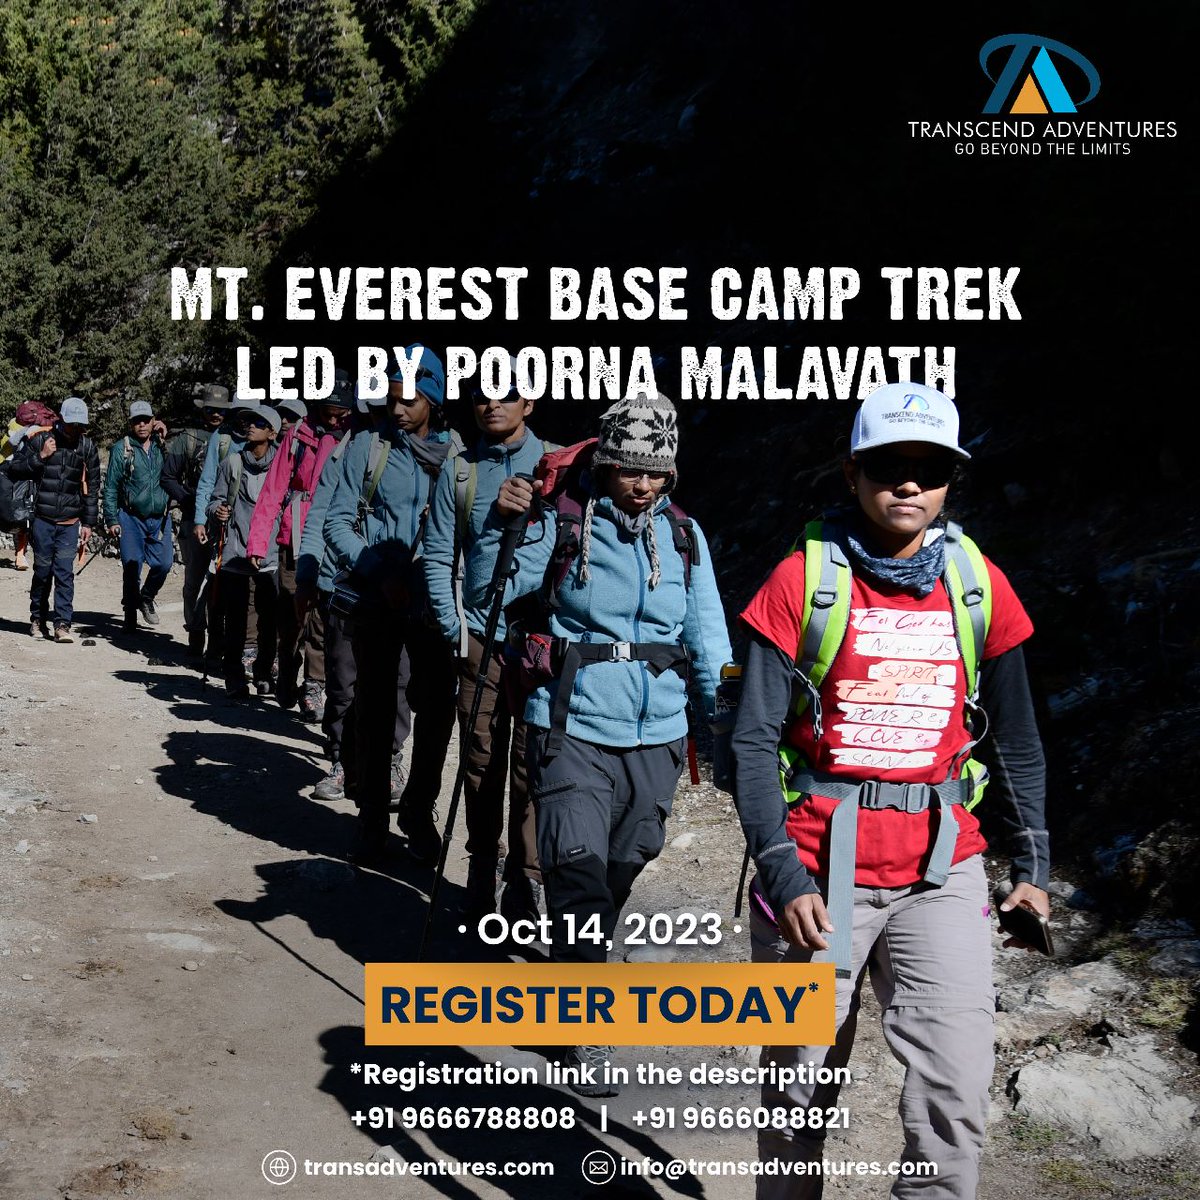 Join me on an incredible adventure trek to Mt. Everest Base Camp organized by @infotranscend

🚩Register using the below link: transadventures.com/transadventure…

#transcendadventures #everest2023 #nepal #poornamalavath #india #everestbasecamp #climbing #mountaineering #everest